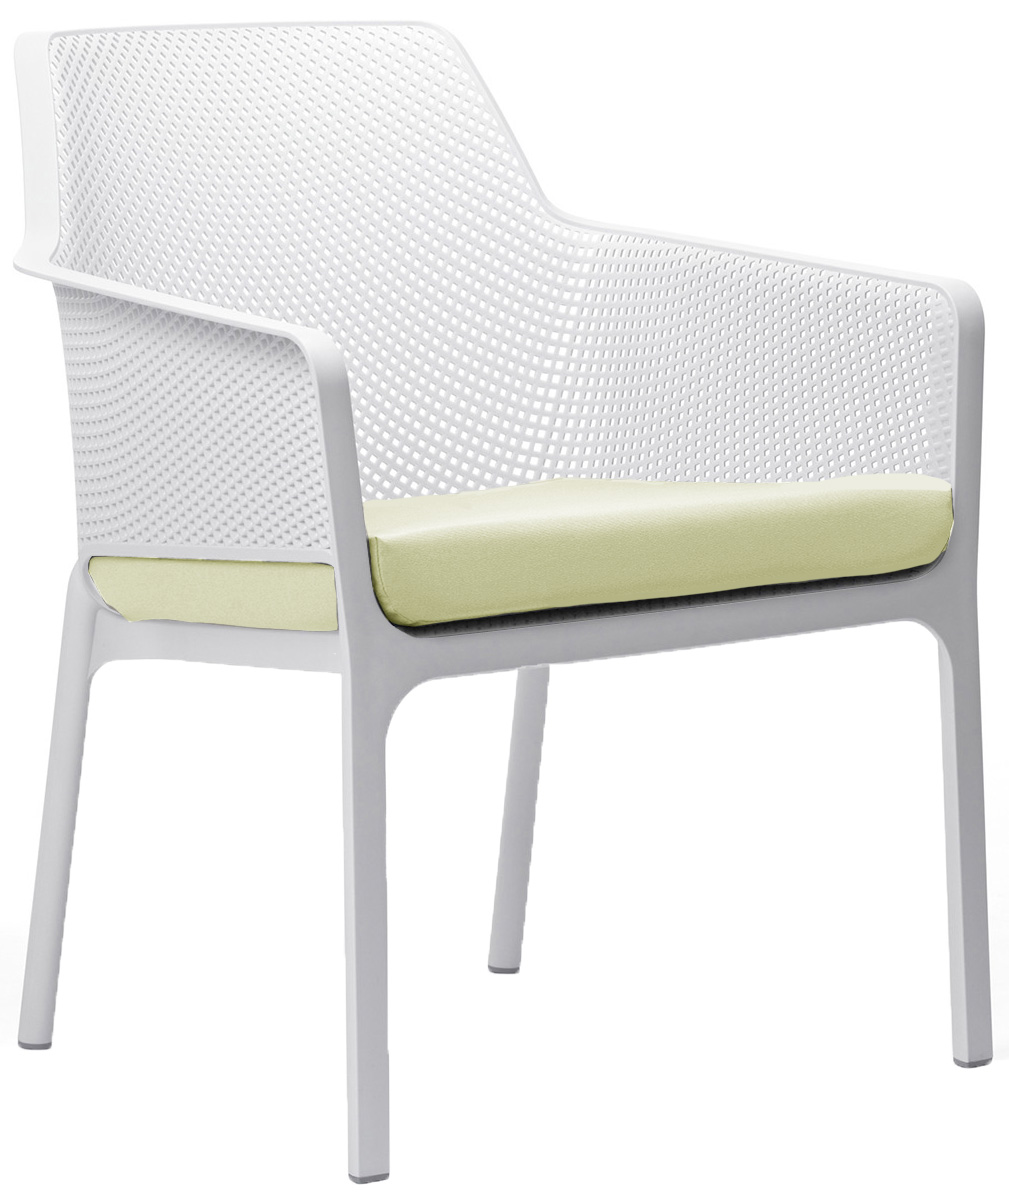 ARM CHAIR NET RELAX WHITE + PAD UPH IN CLIENT FABRIC